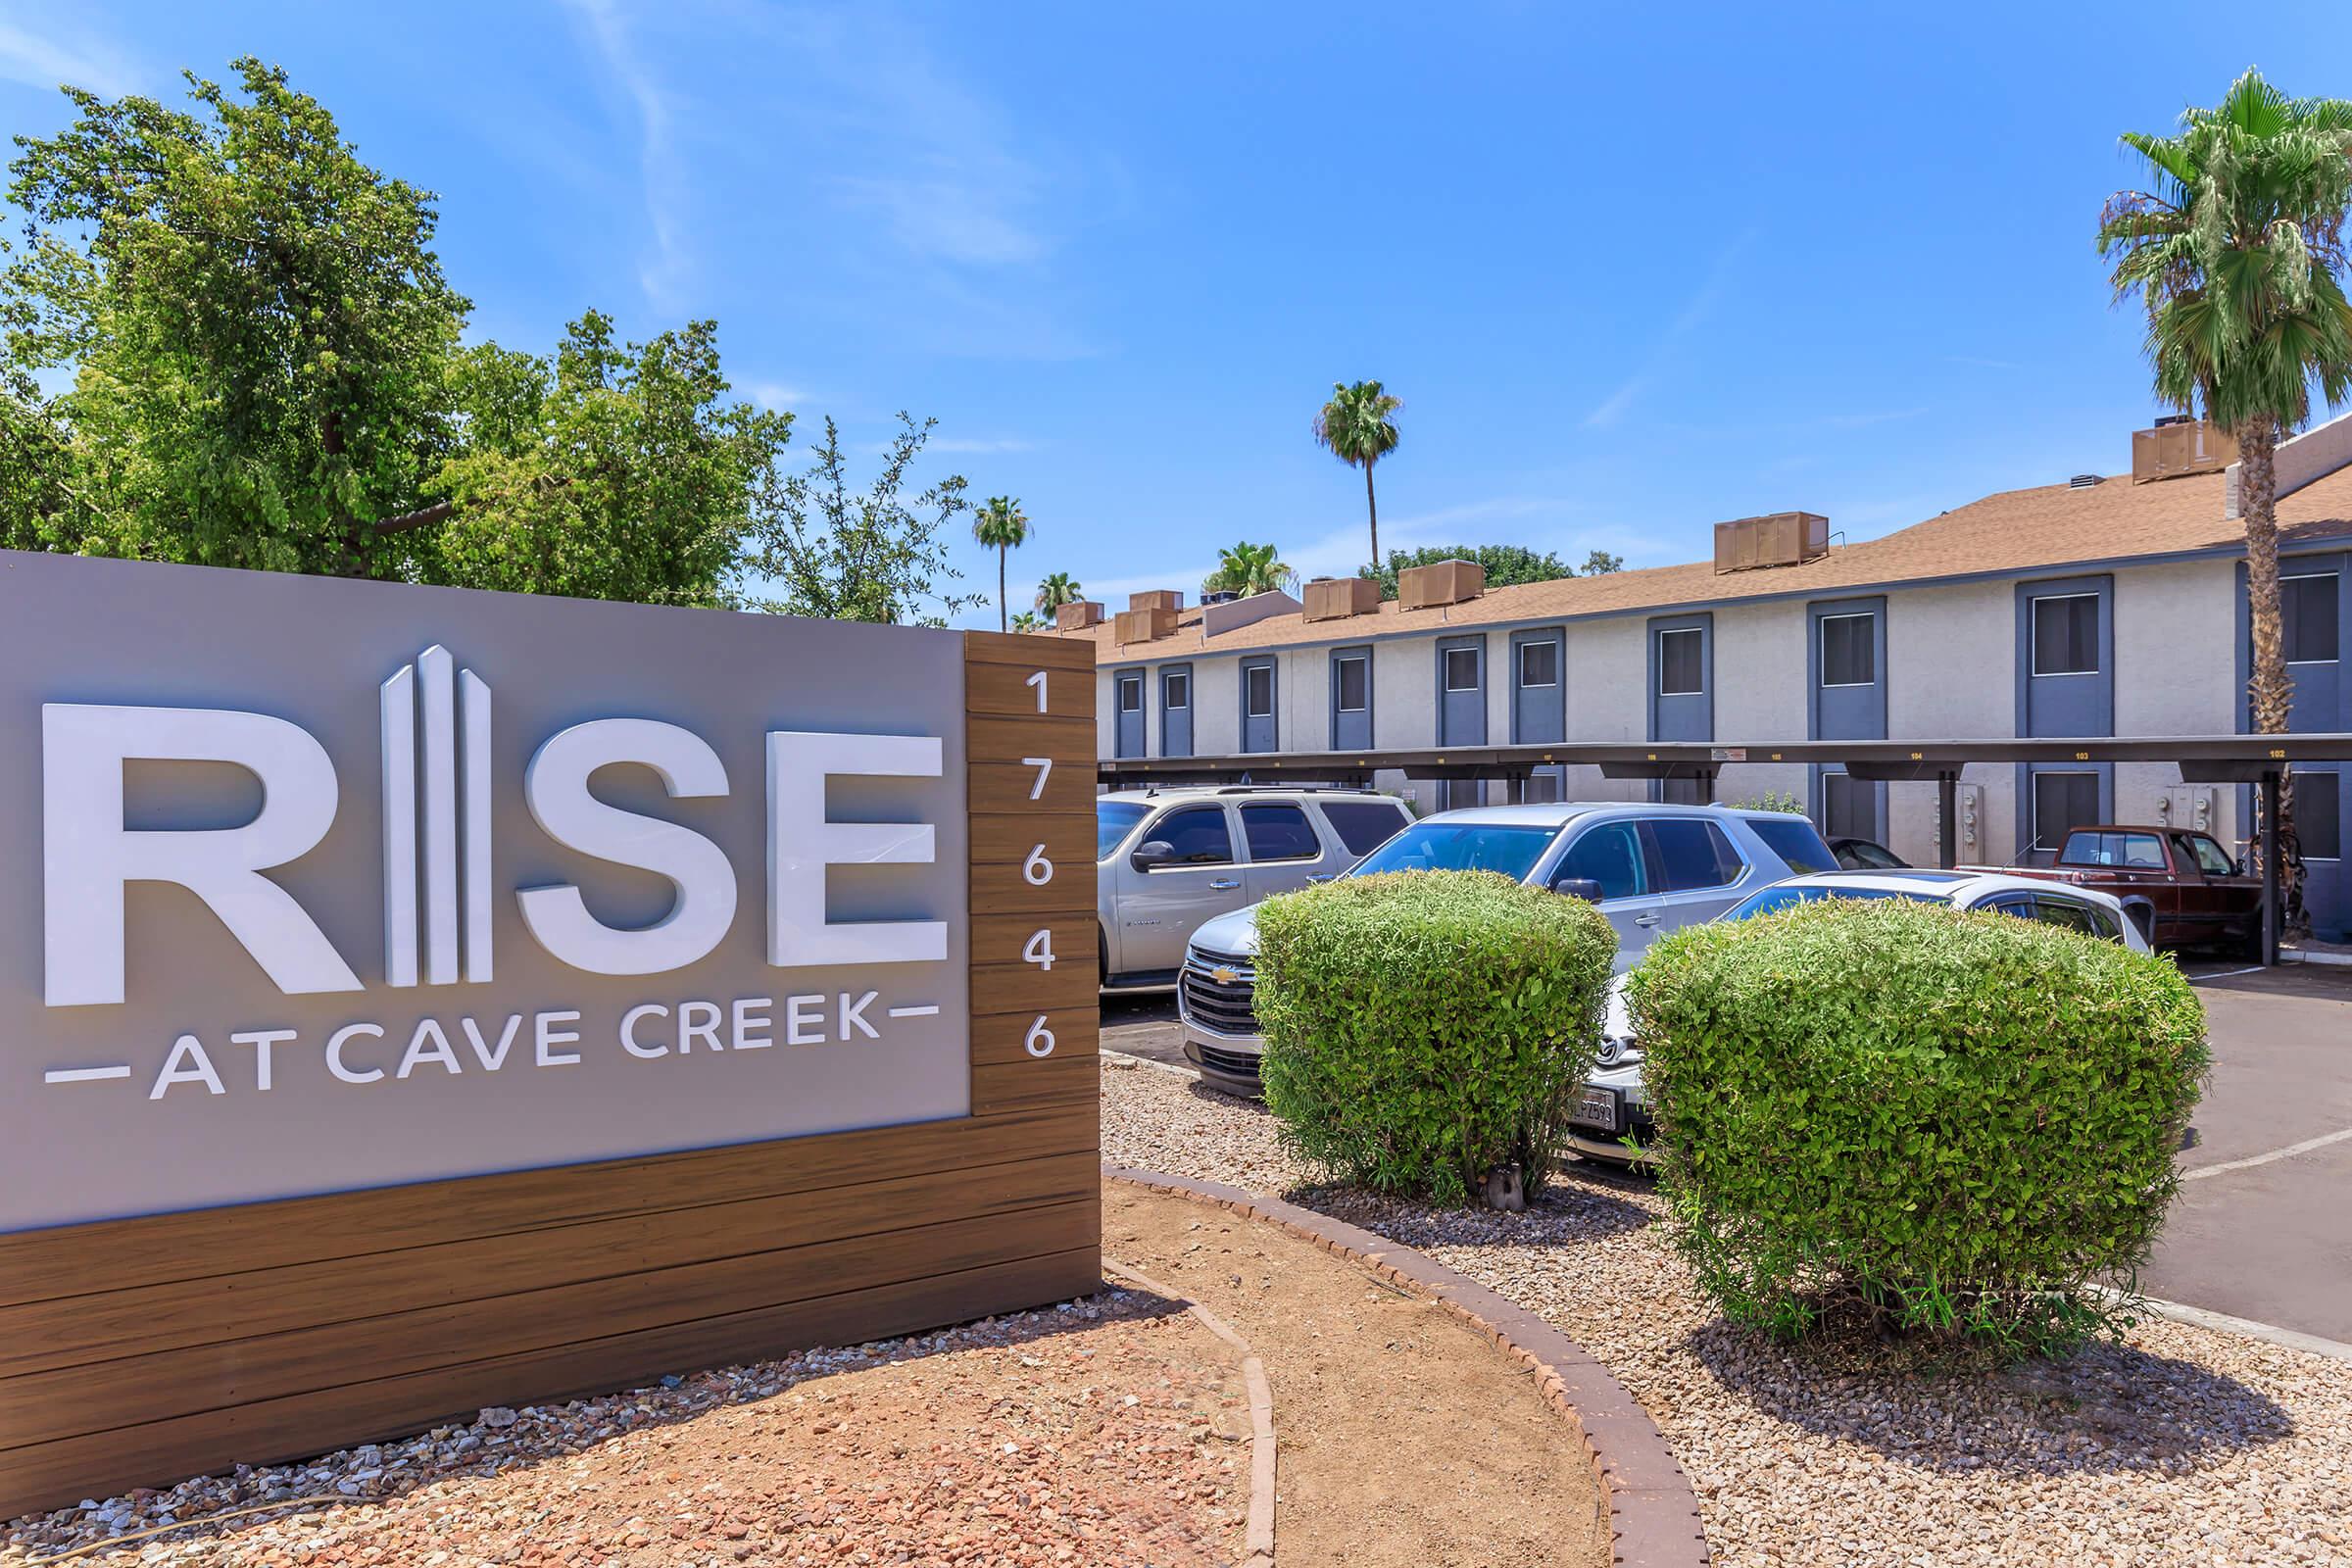 Side view of Rise at Cave Creek signage in front of large apartment complex and parking lot in Phoenix, AZ